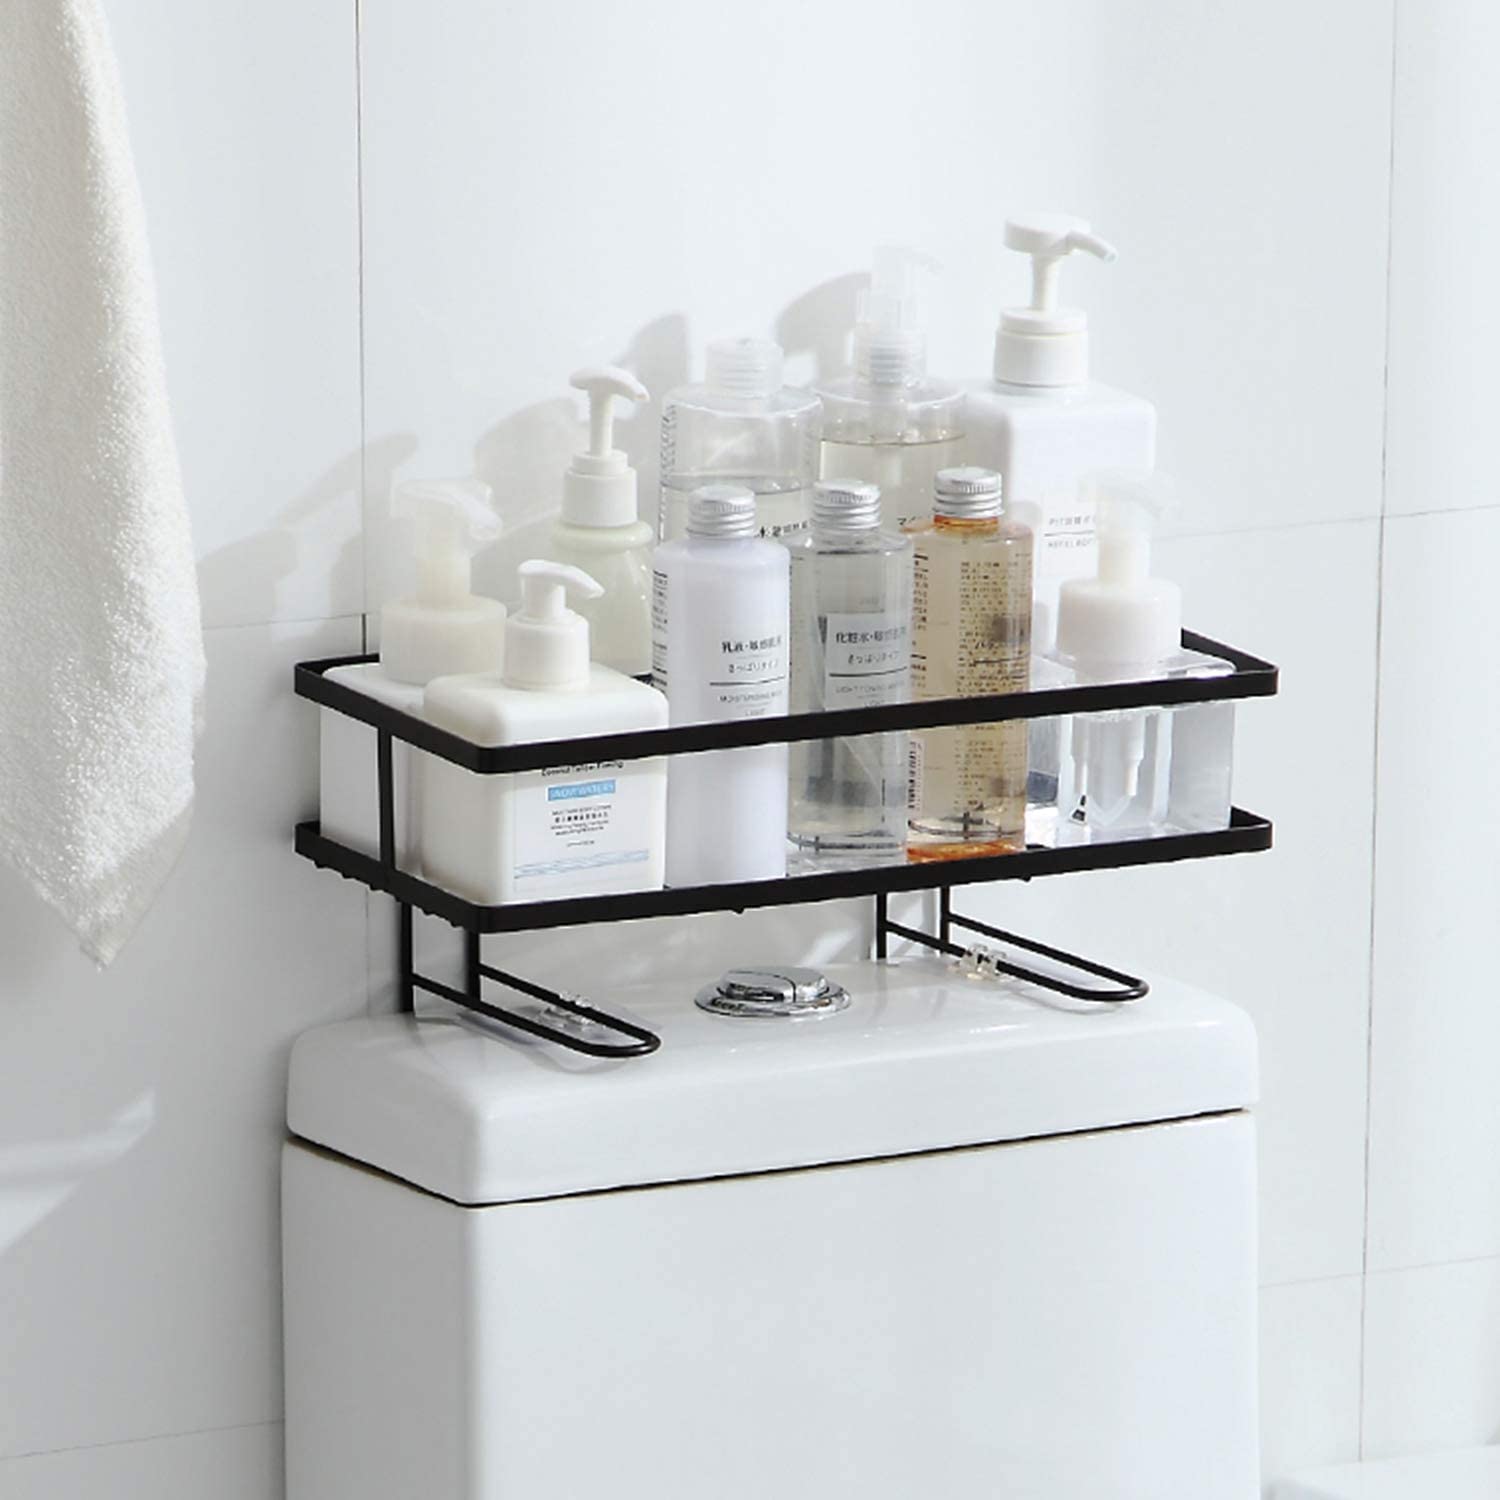 Toiletries in organizer rack placed on top of toilet